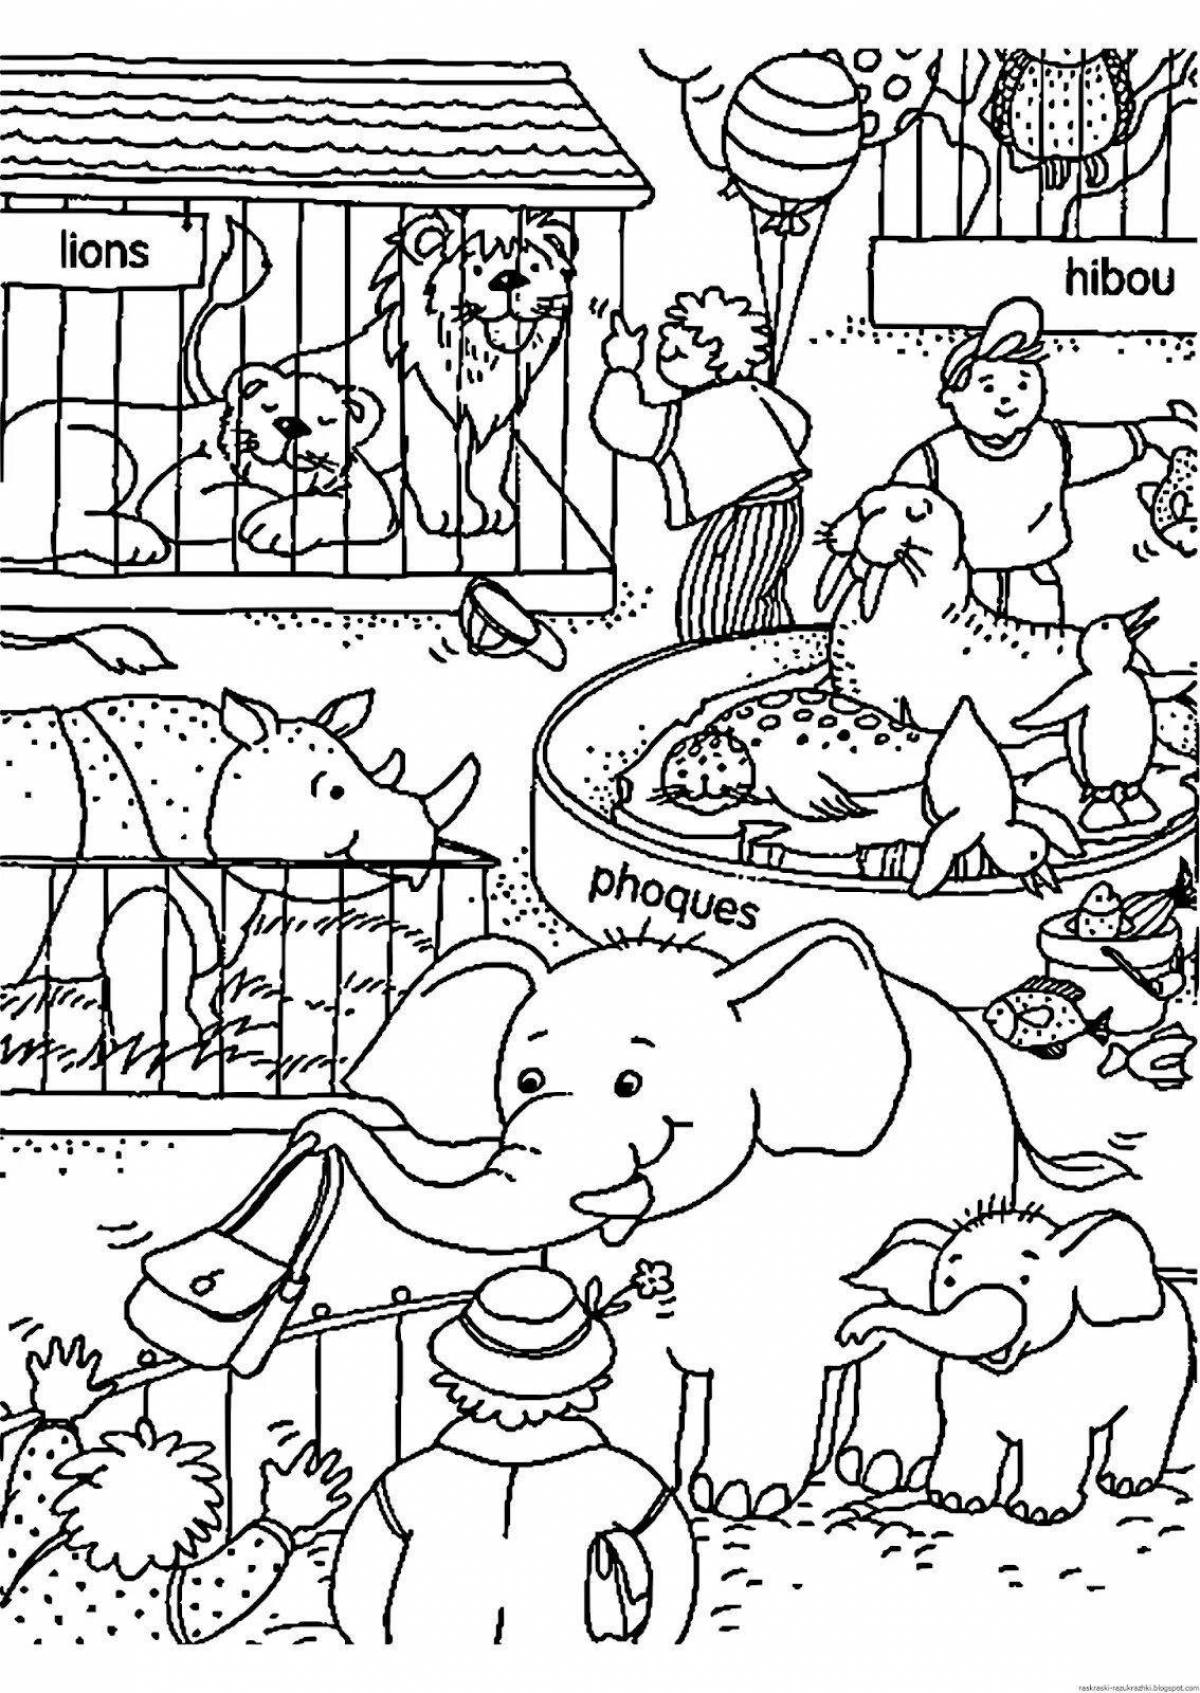 Fun zoo coloring book for 5-6 year olds